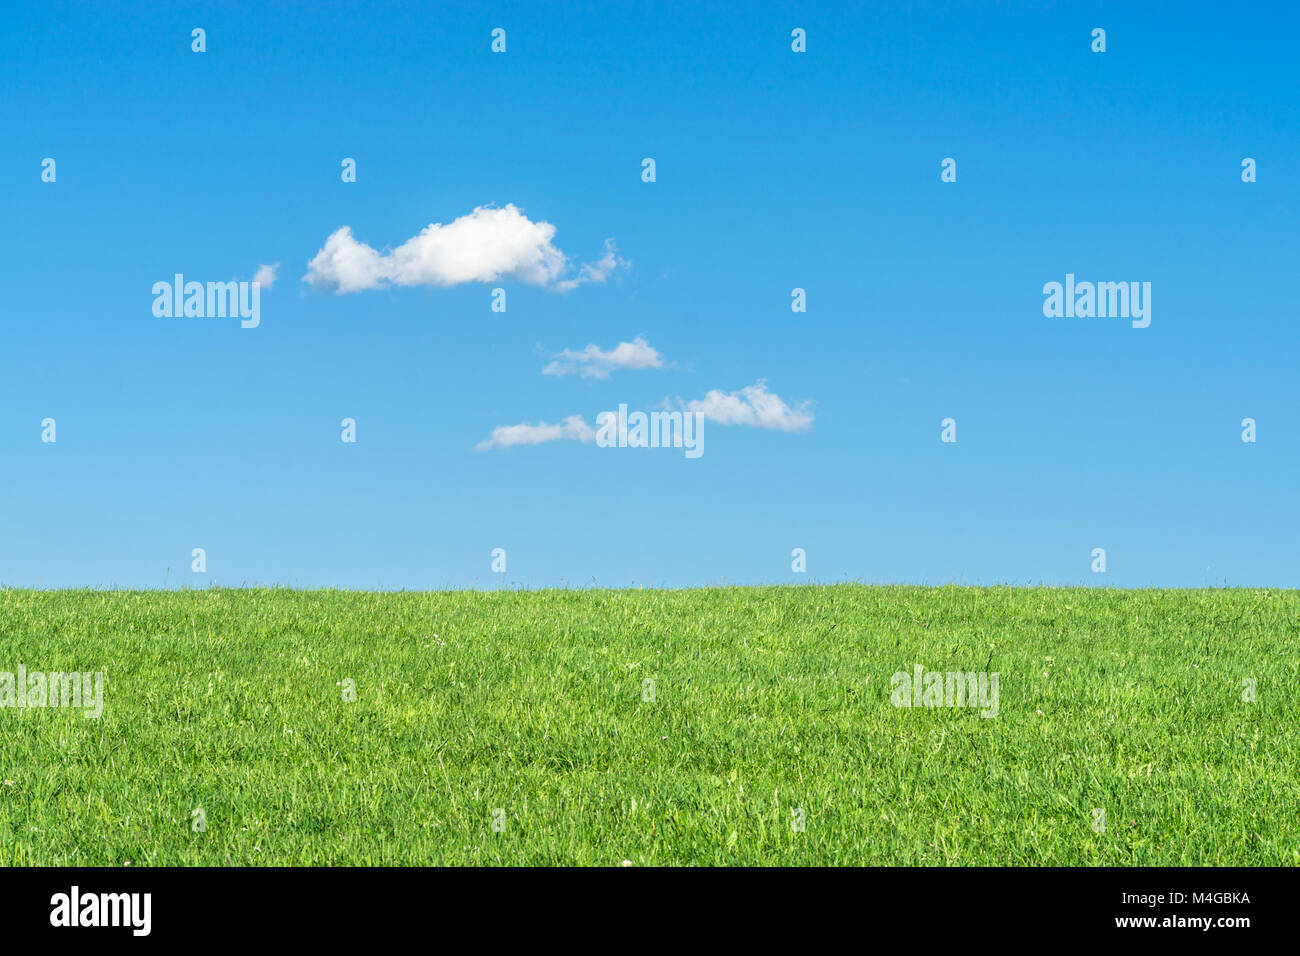 Green grass field with clear blue sky and white clouds Stock Photo